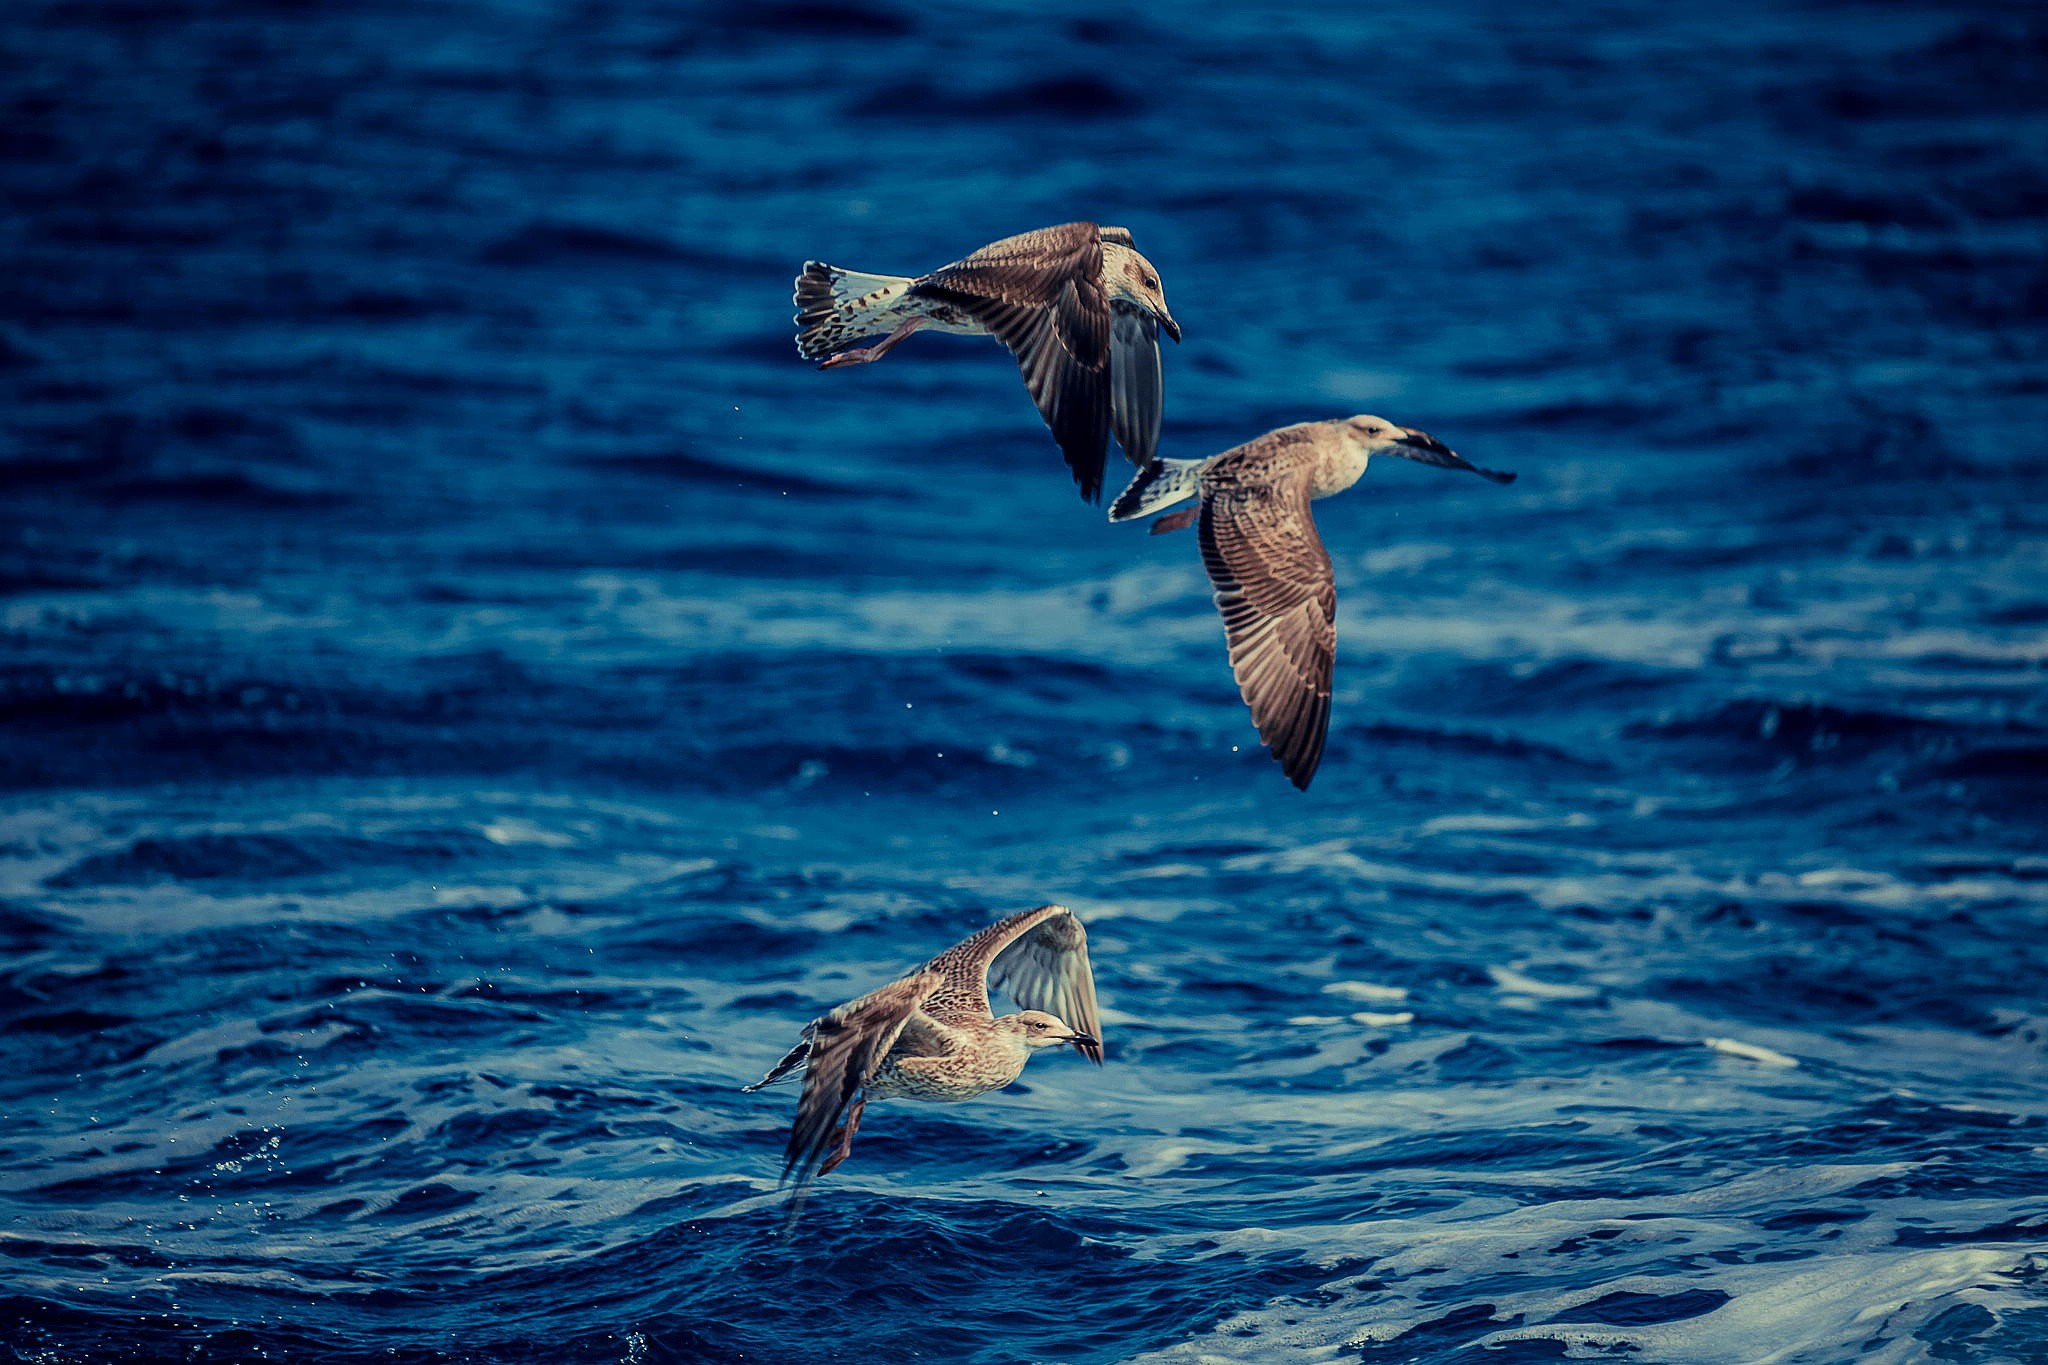 General 2048x1365 animals nature birds wings flying